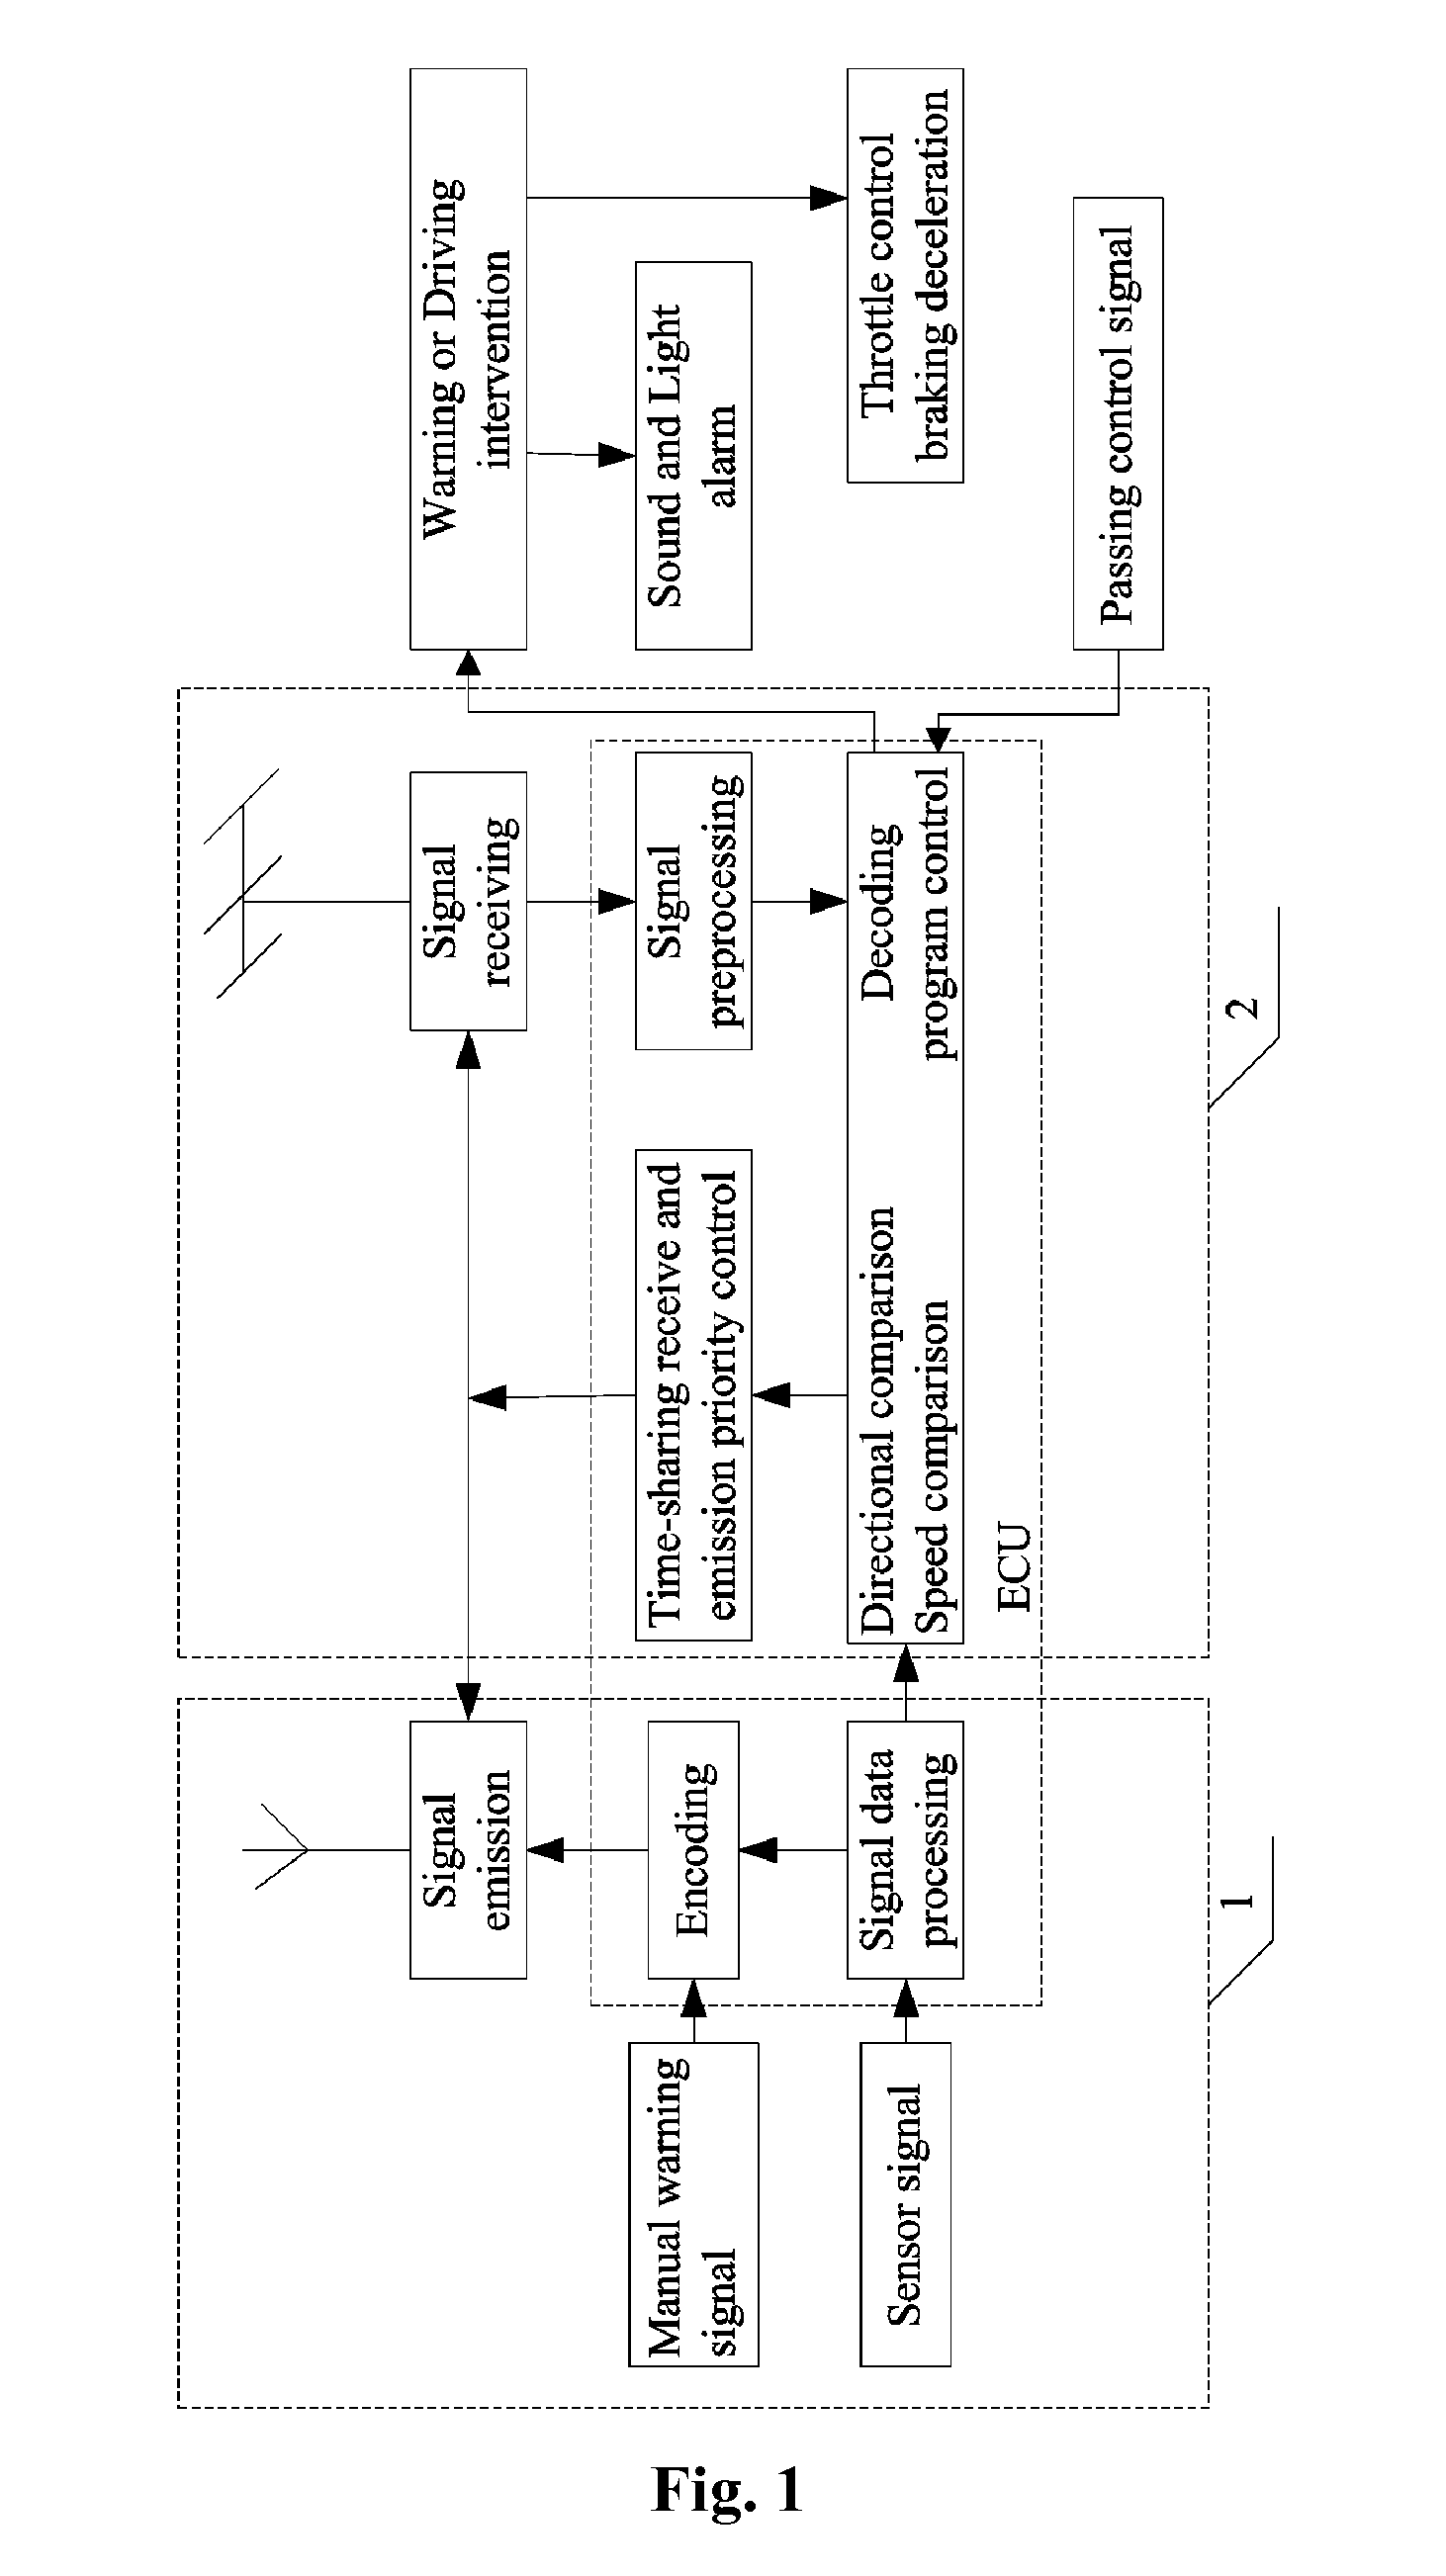 Apparatus and Method for Warning and Prevention of Vehicle Collisions